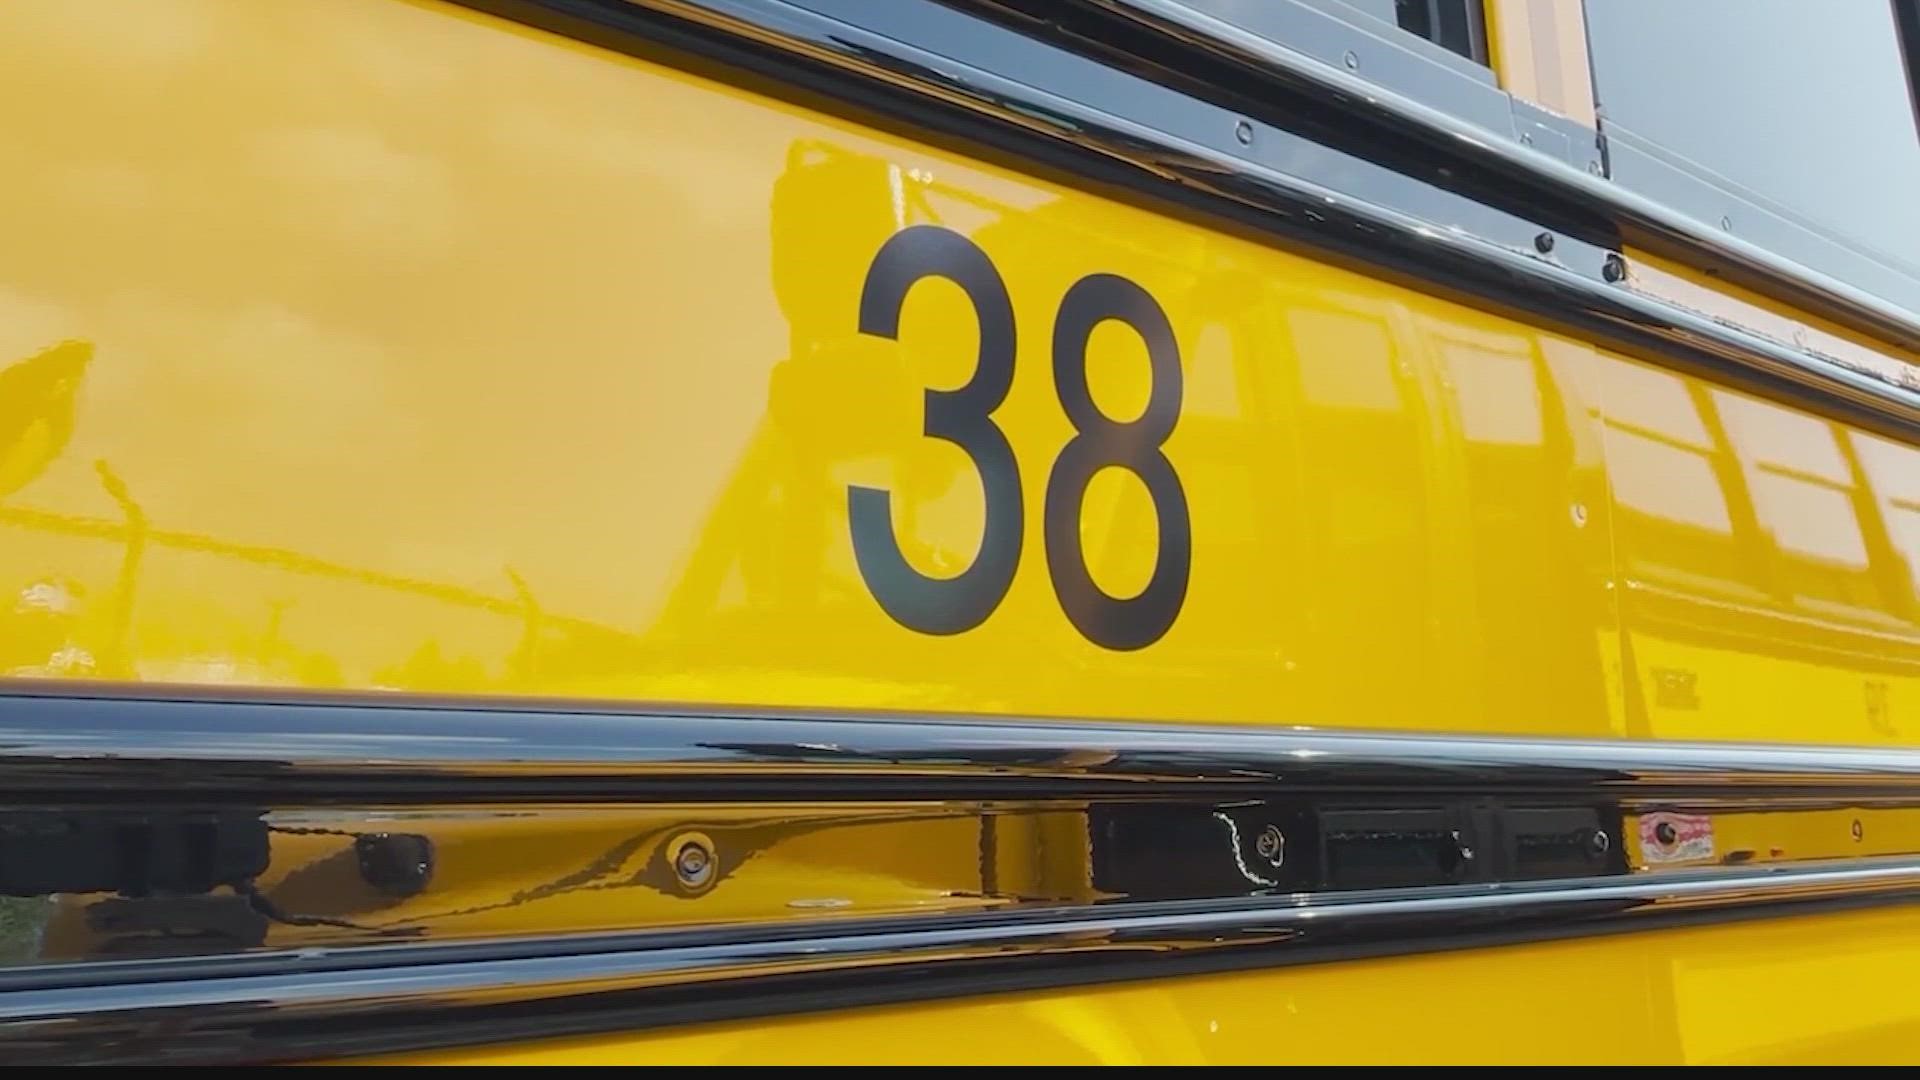 Here's what Decatur City Schools bus drivers are doing to ensure your kids are kept safe.